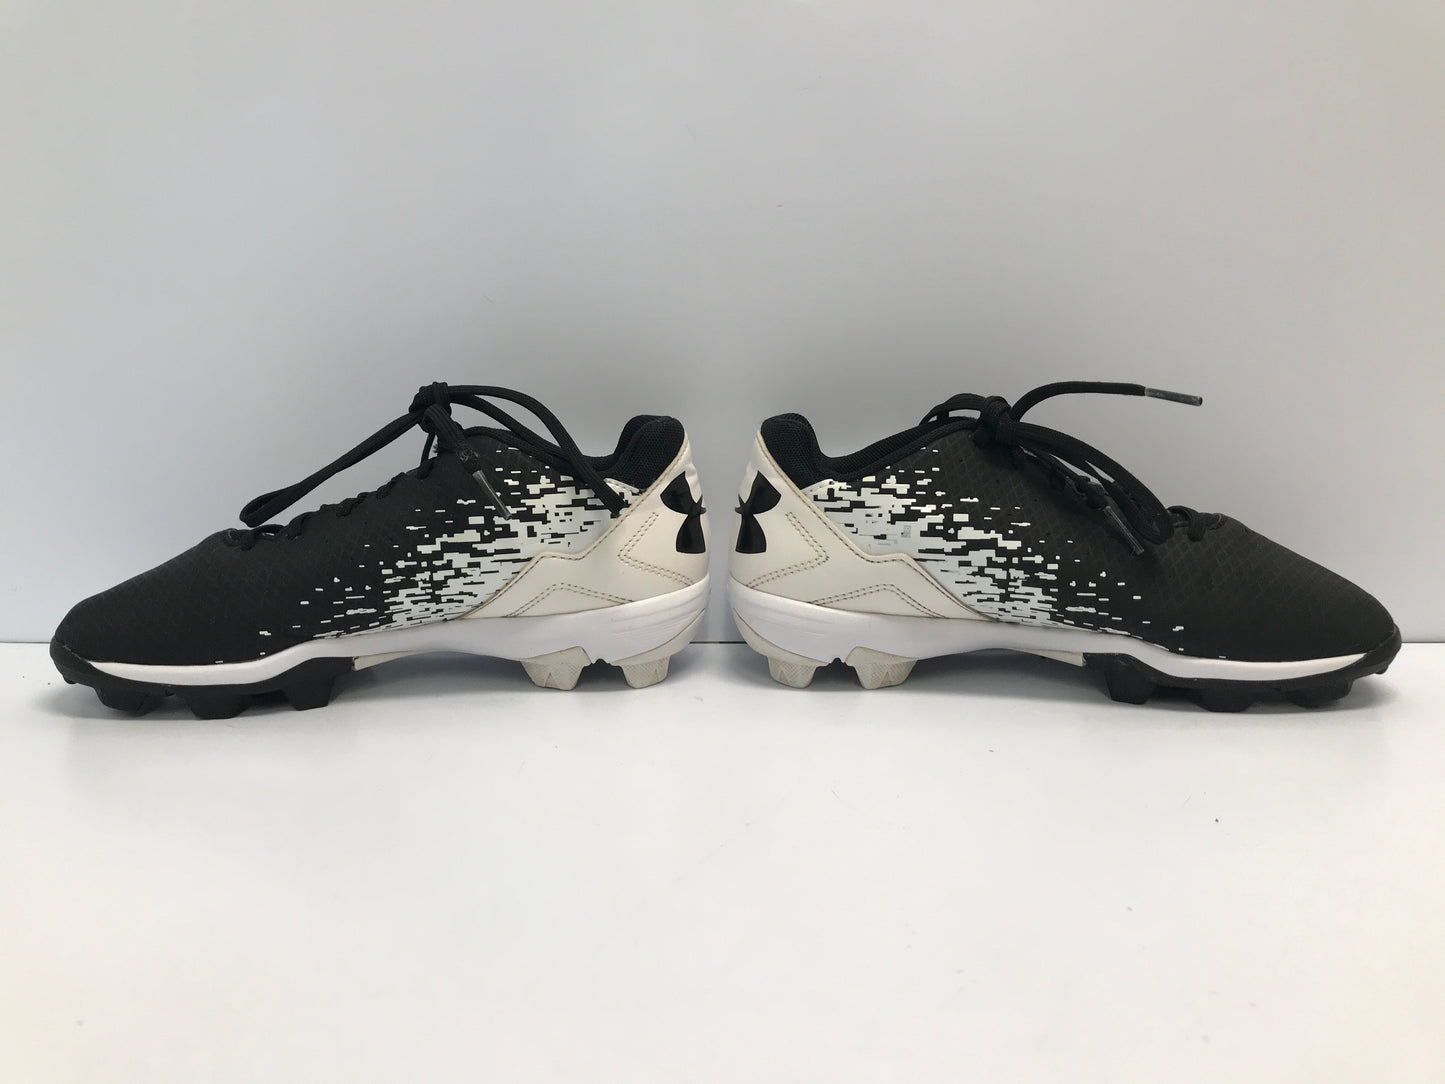 Baseball Shoes Cleats Child Size 3.5 Under Armour Black White Excellent